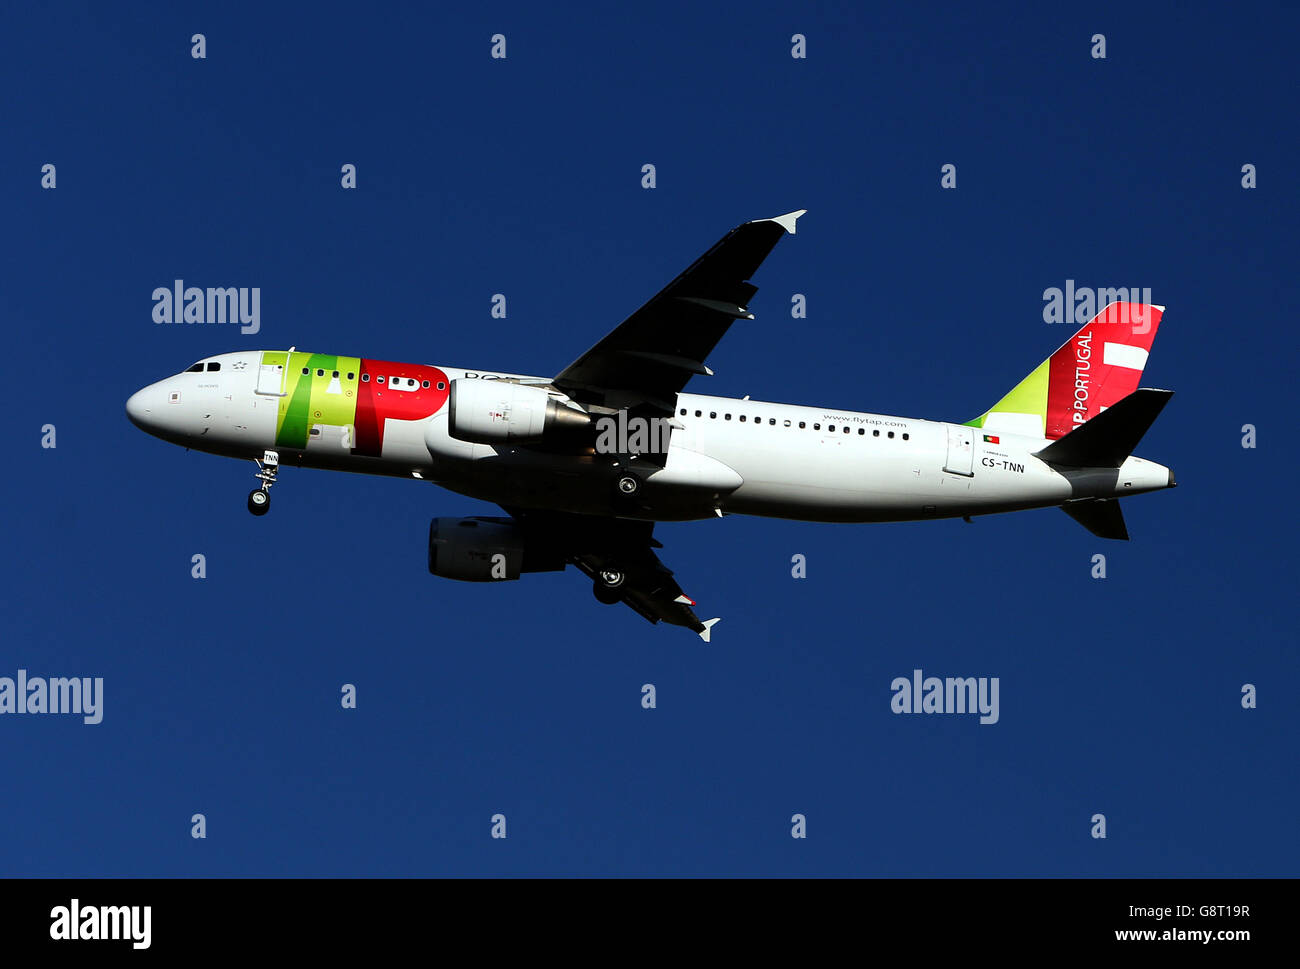 Plane Stock - Heathrow Airport. A TAP - Air Portugal Airbus A320-214 plane with the registration CS-TNN lands at Heathrow Stock Photo